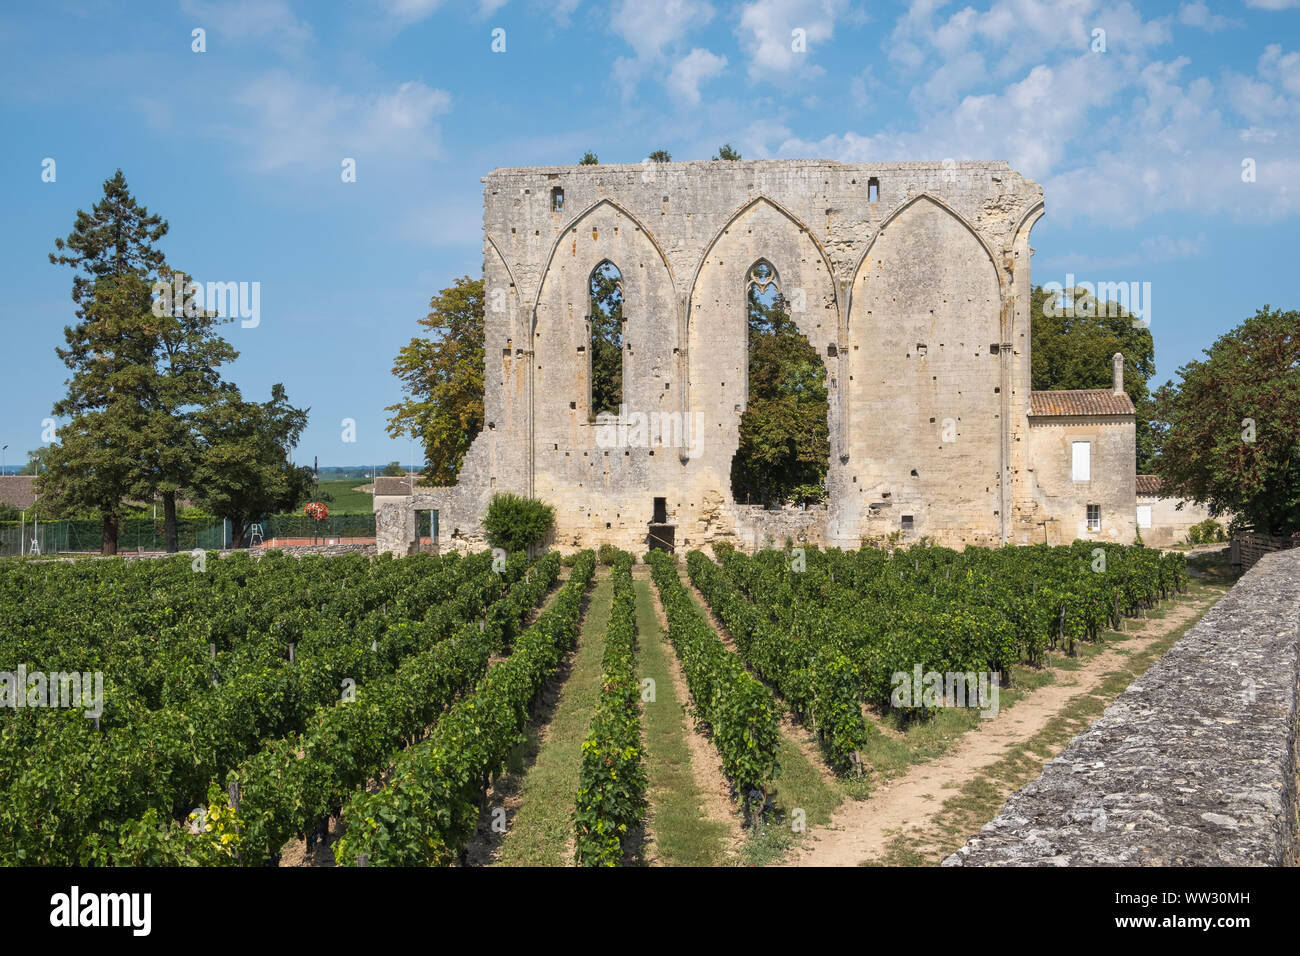 The old ruins in the vineyard at Chateau Grandes Murailles in Saint-Emilion, Bordeaux, France Stock Photo